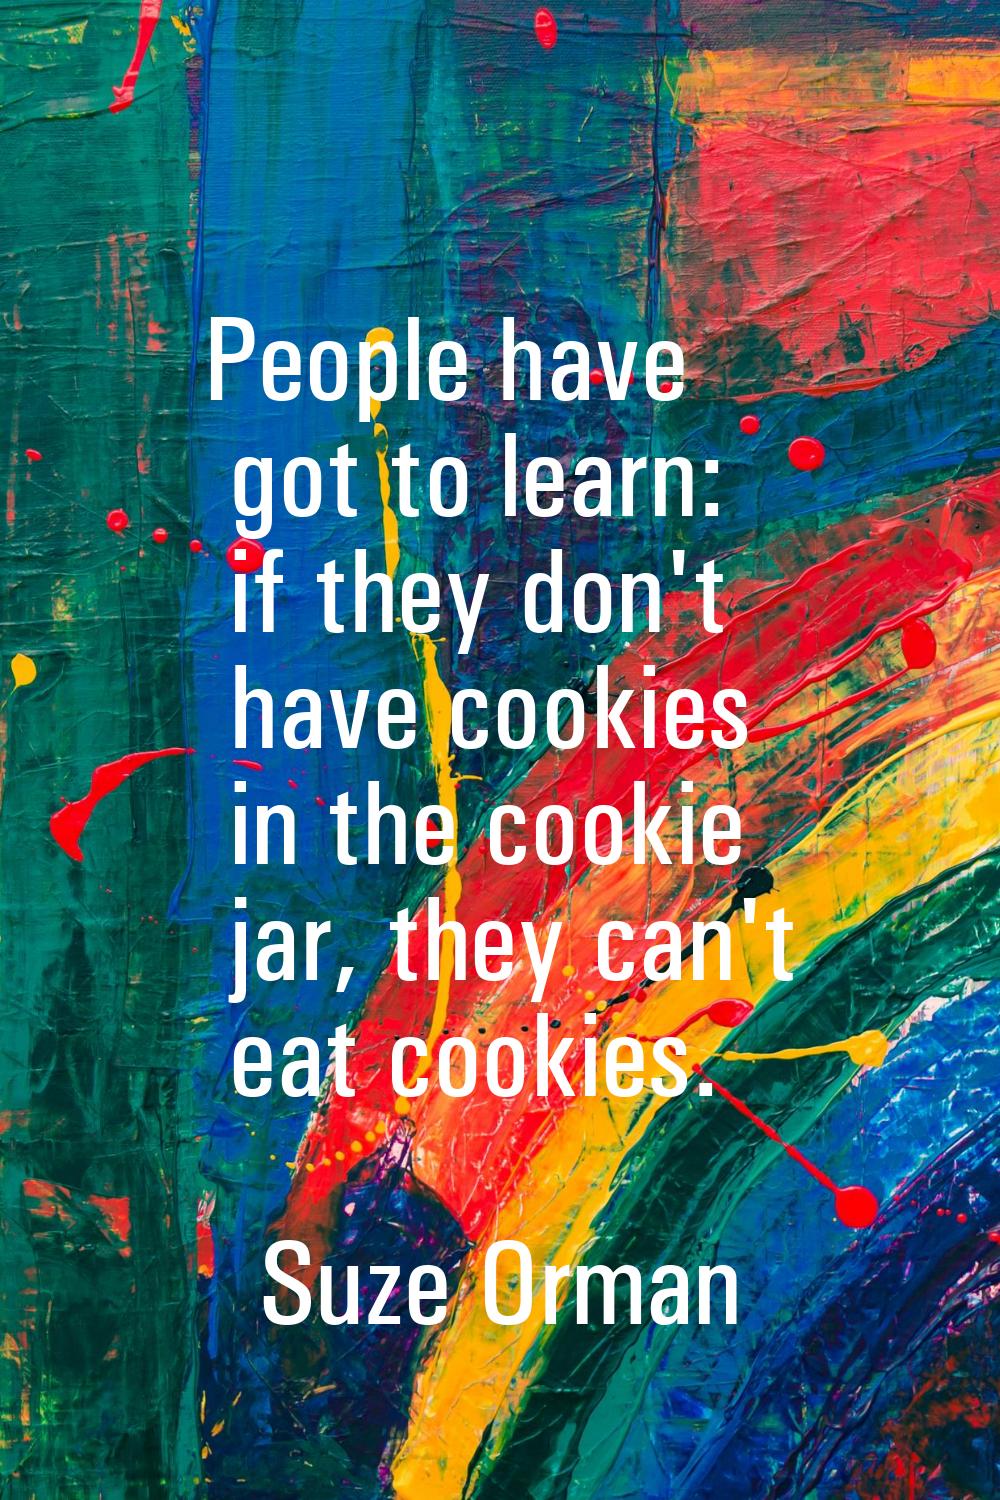 People have got to learn: if they don't have cookies in the cookie jar, they can't eat cookies.